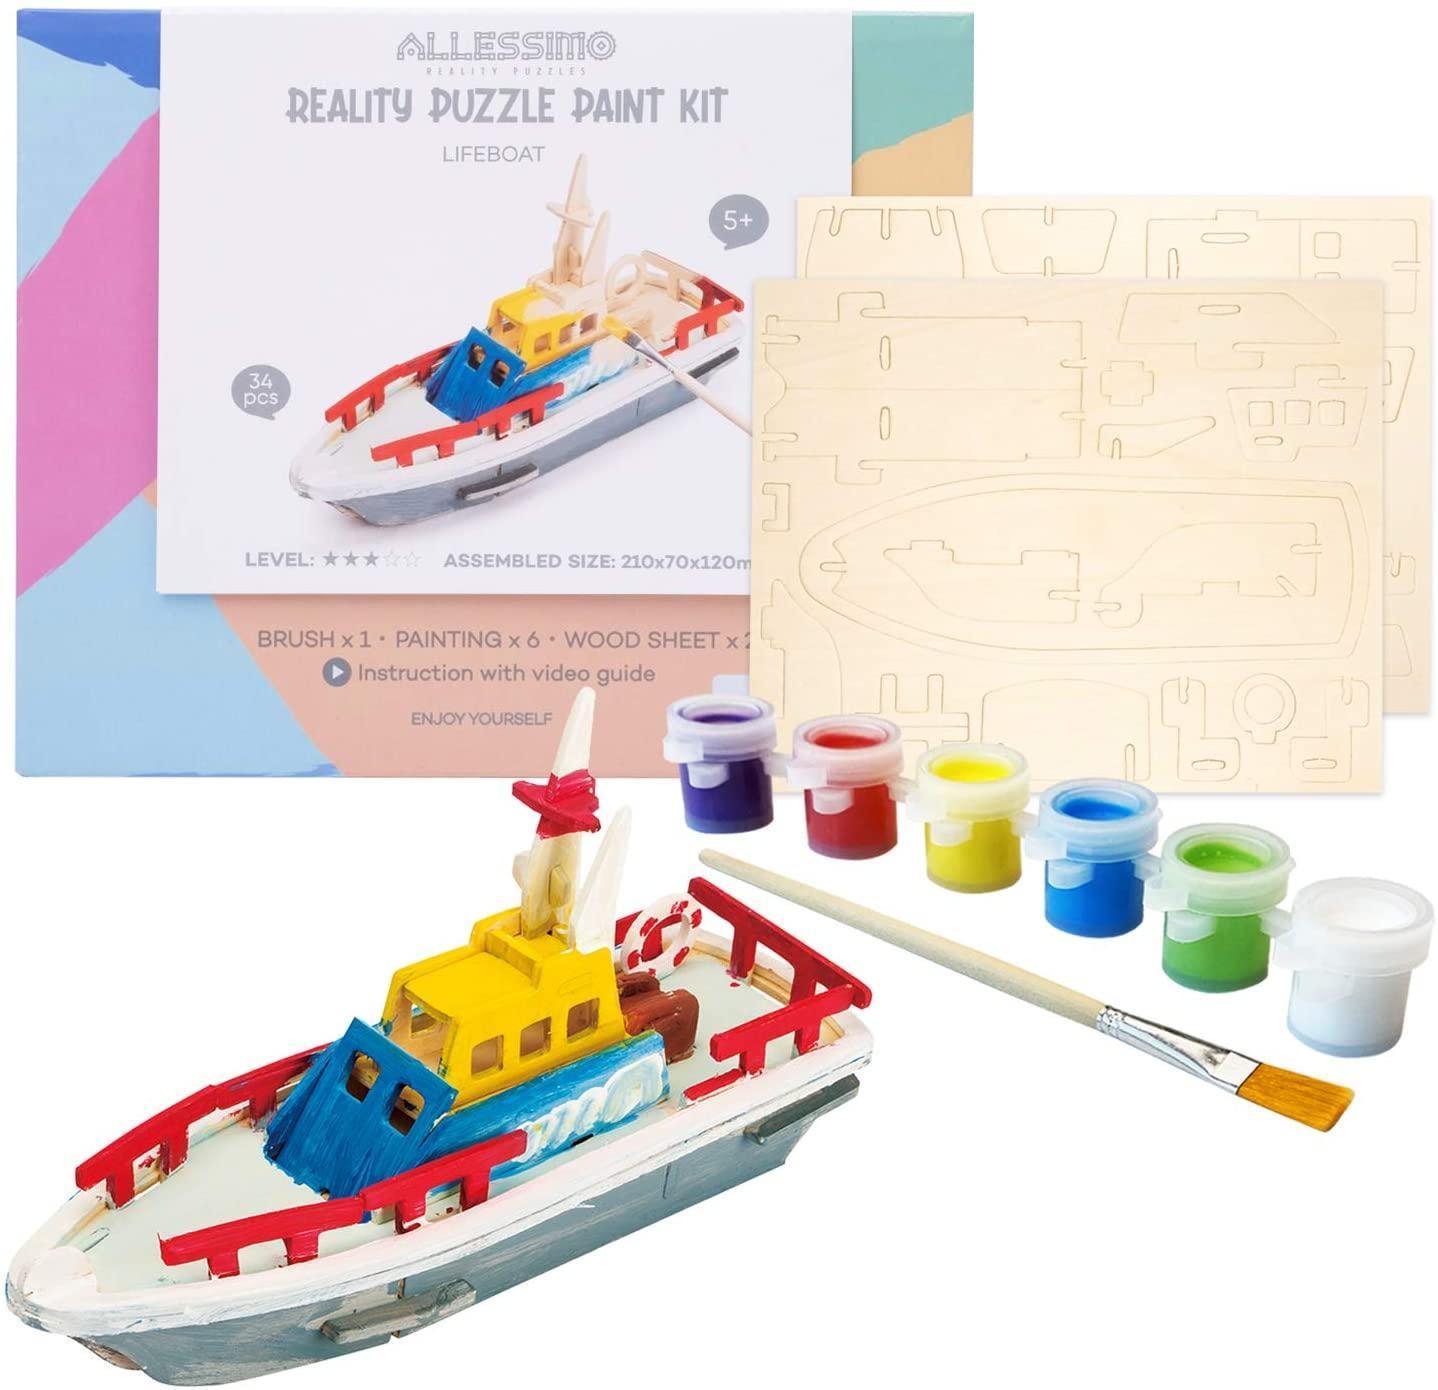 Allessimo 3D Paint Puzzle Create (Life Boat - 34pcs) | Hao Xiang - 1000pcs Home Wall- $24.99 MSRP